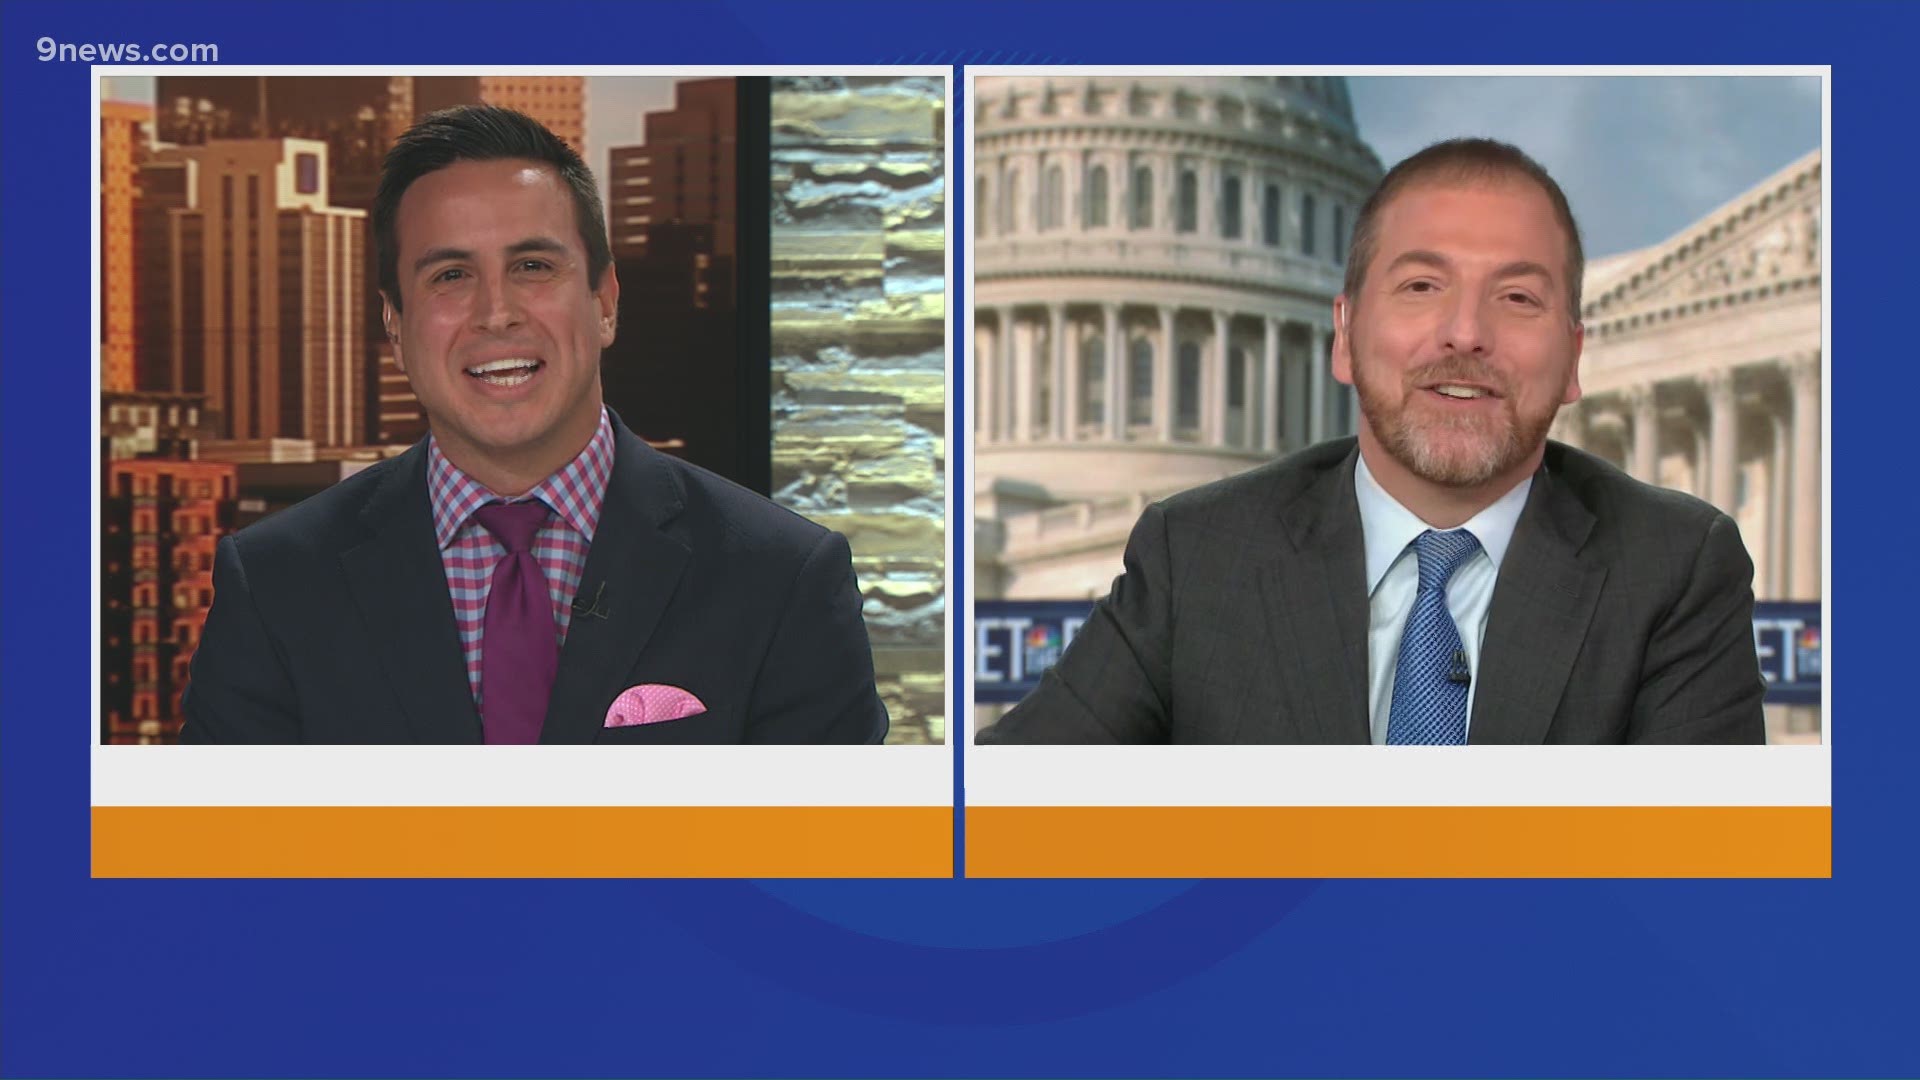 NBC's Chuck Todd talks about U.S. leadership on vaccinations and the MLB All-Star Game moving to Colorado.